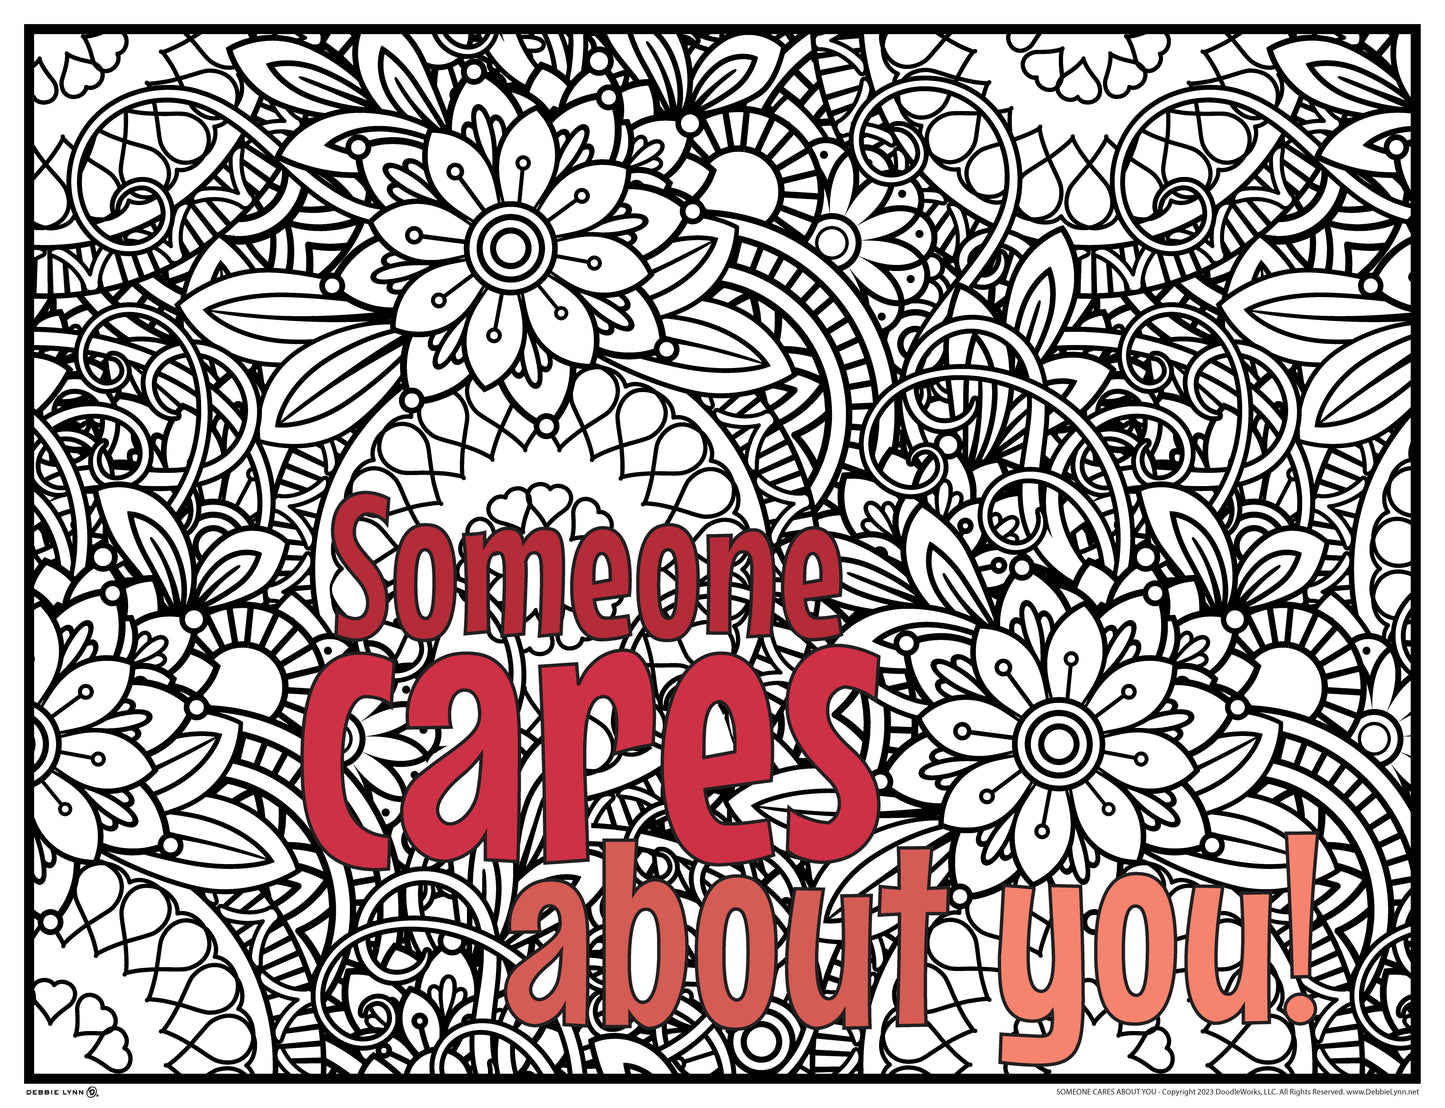 Someone Cares About You Personalized Giant Coloring Poster 46"x60"